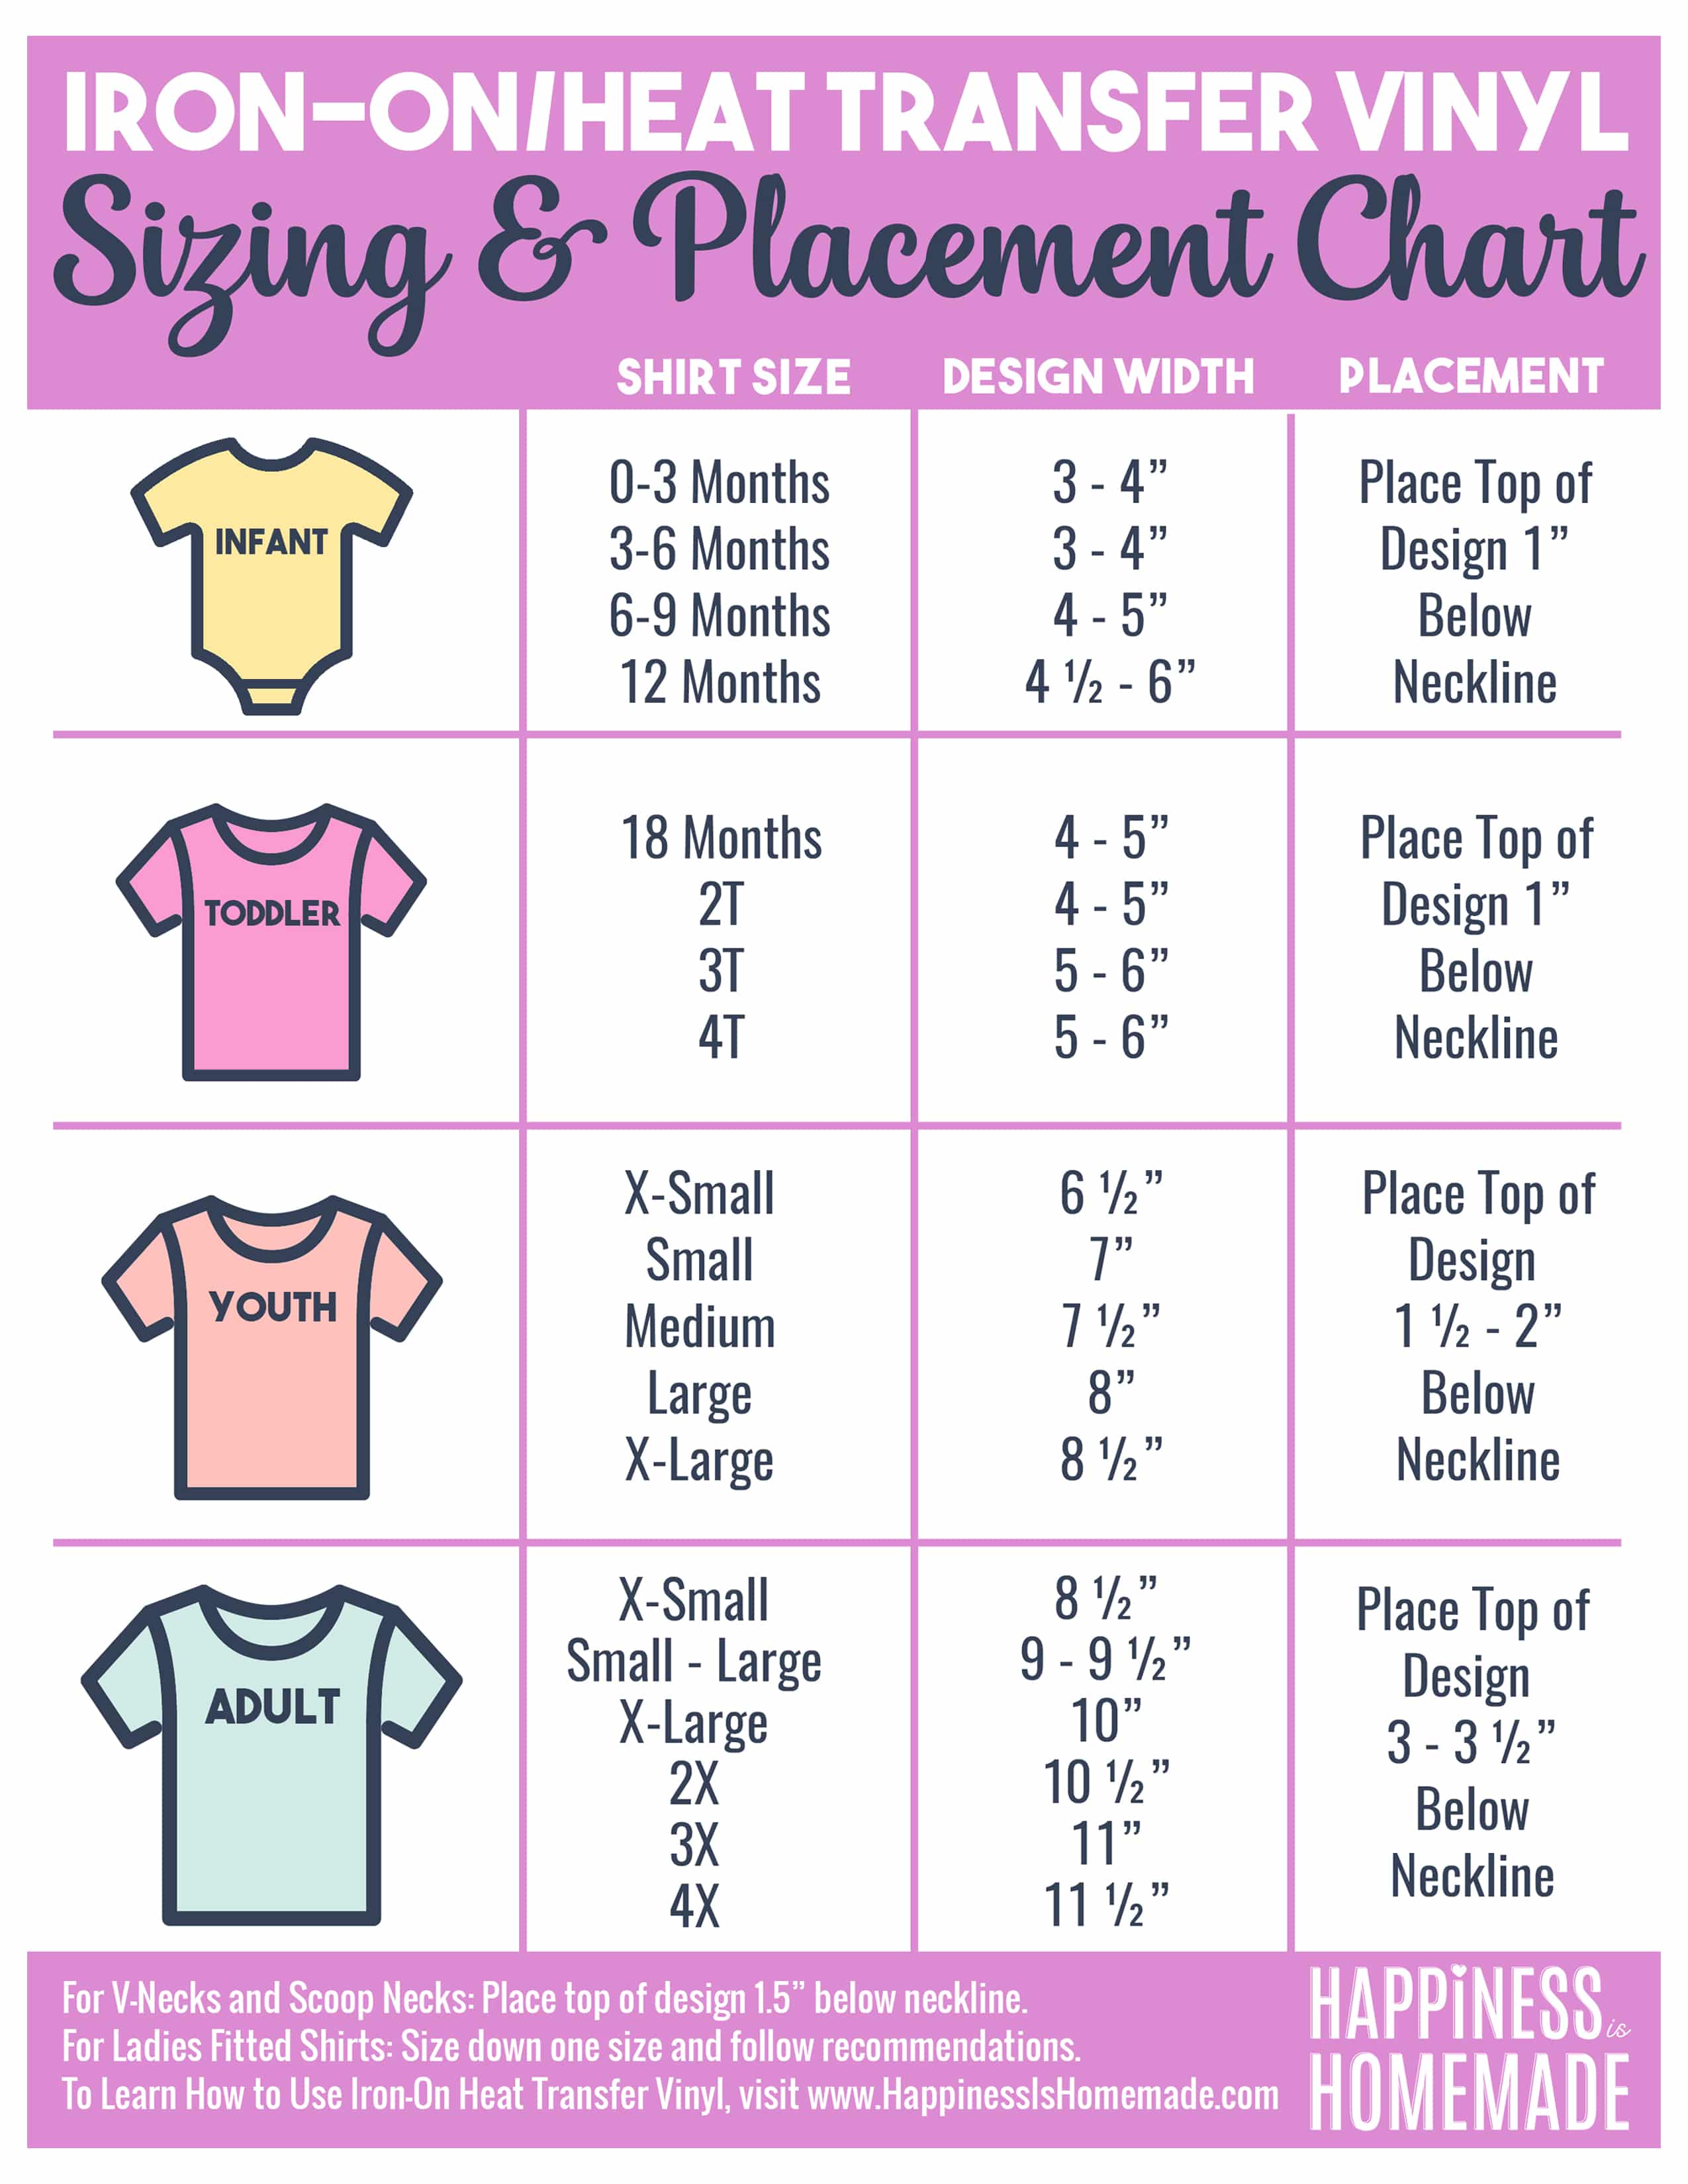 Iron-On Heat Transfer Vinyl Sizing and Placement Chart